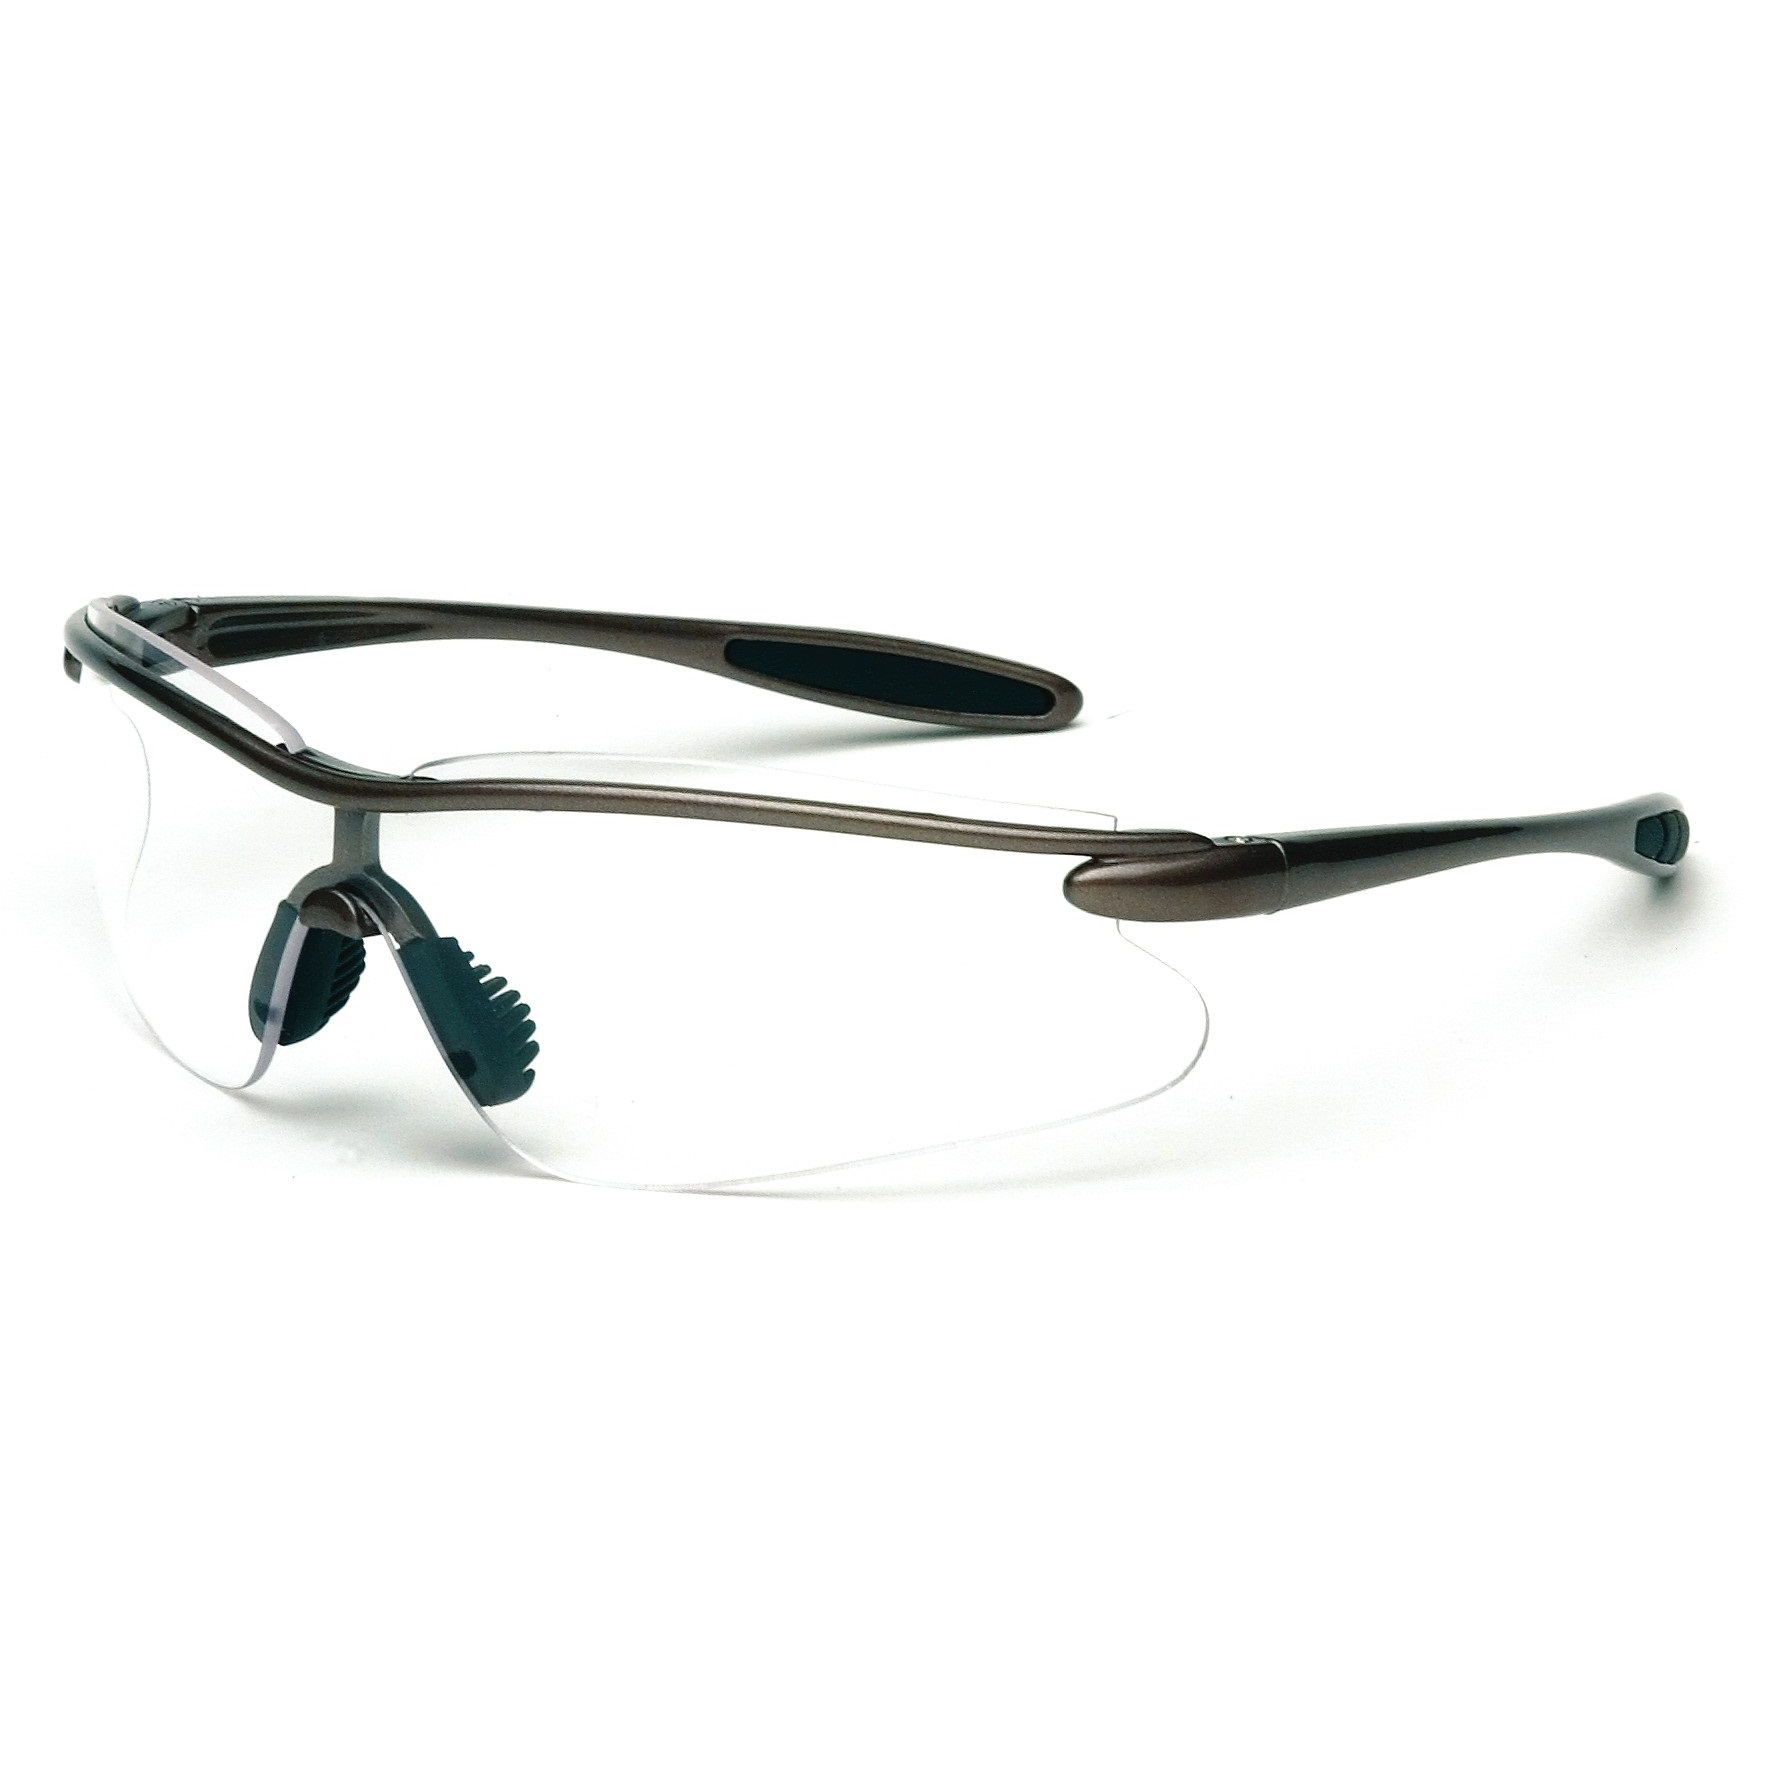 Galeton Verge Safety Glasses with Fog Free Clear Lens